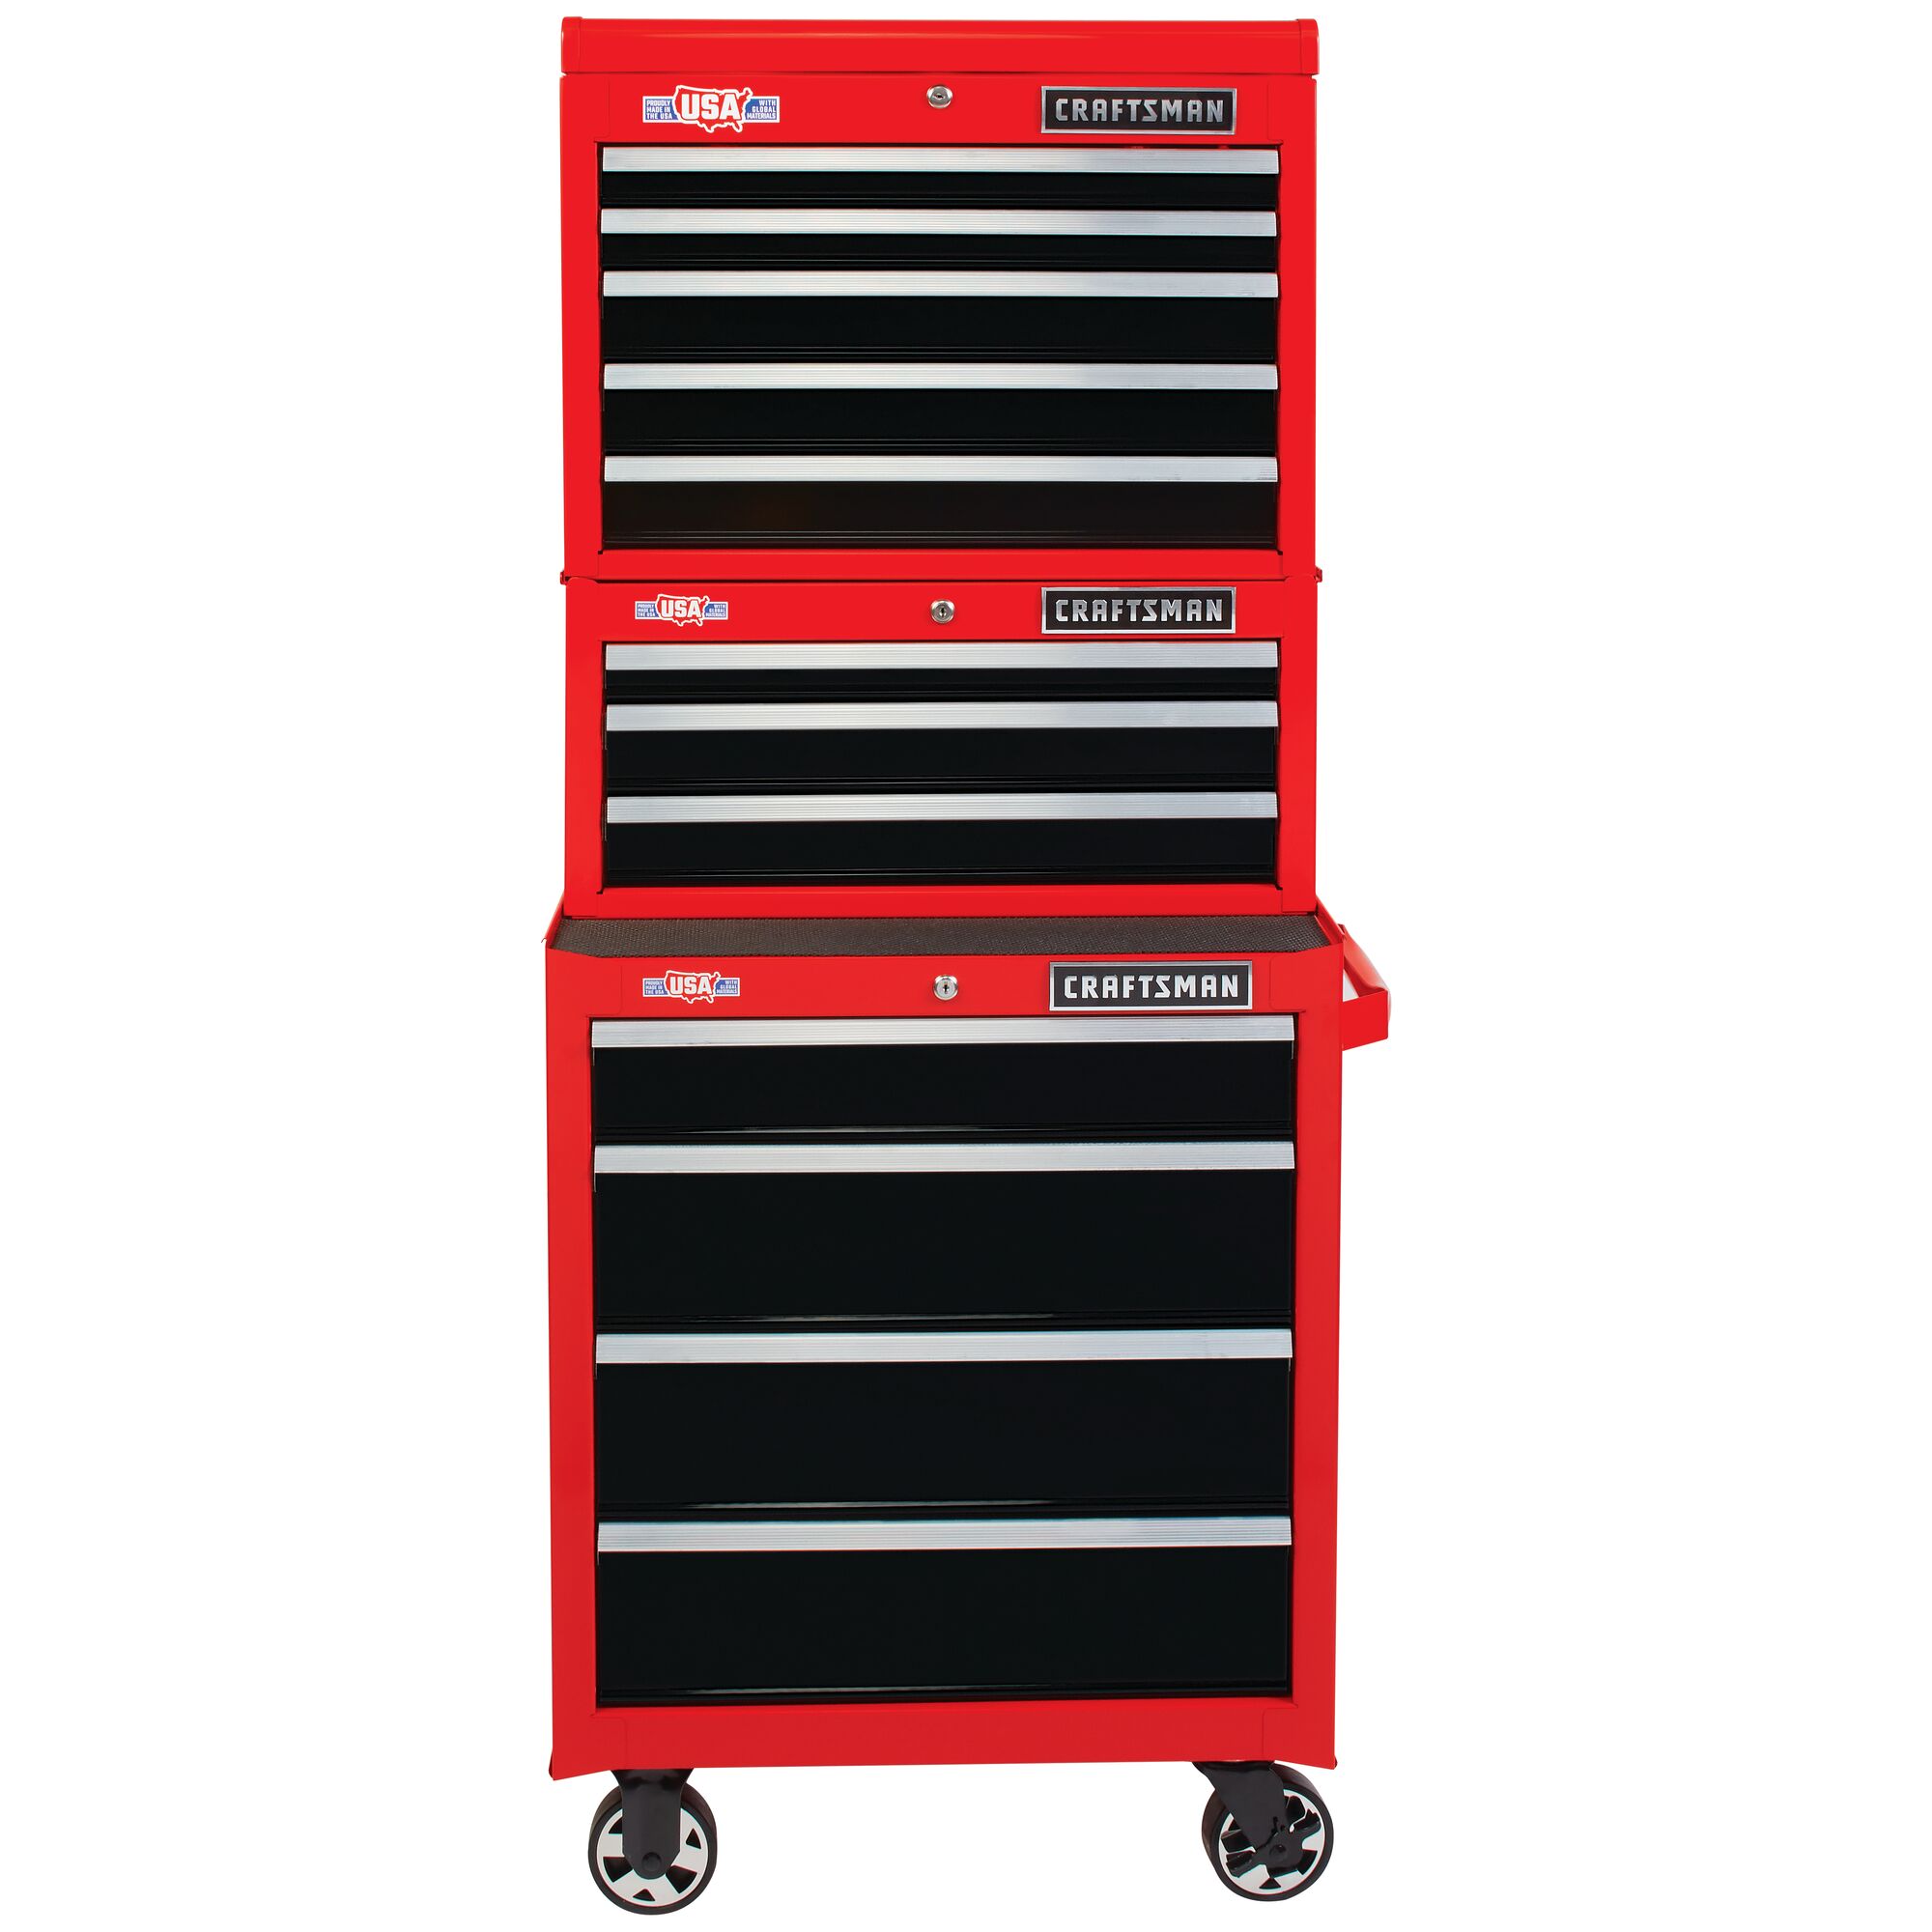 26 inch 3 drawer intermediate tool chest with other tool chests stacked on each other.